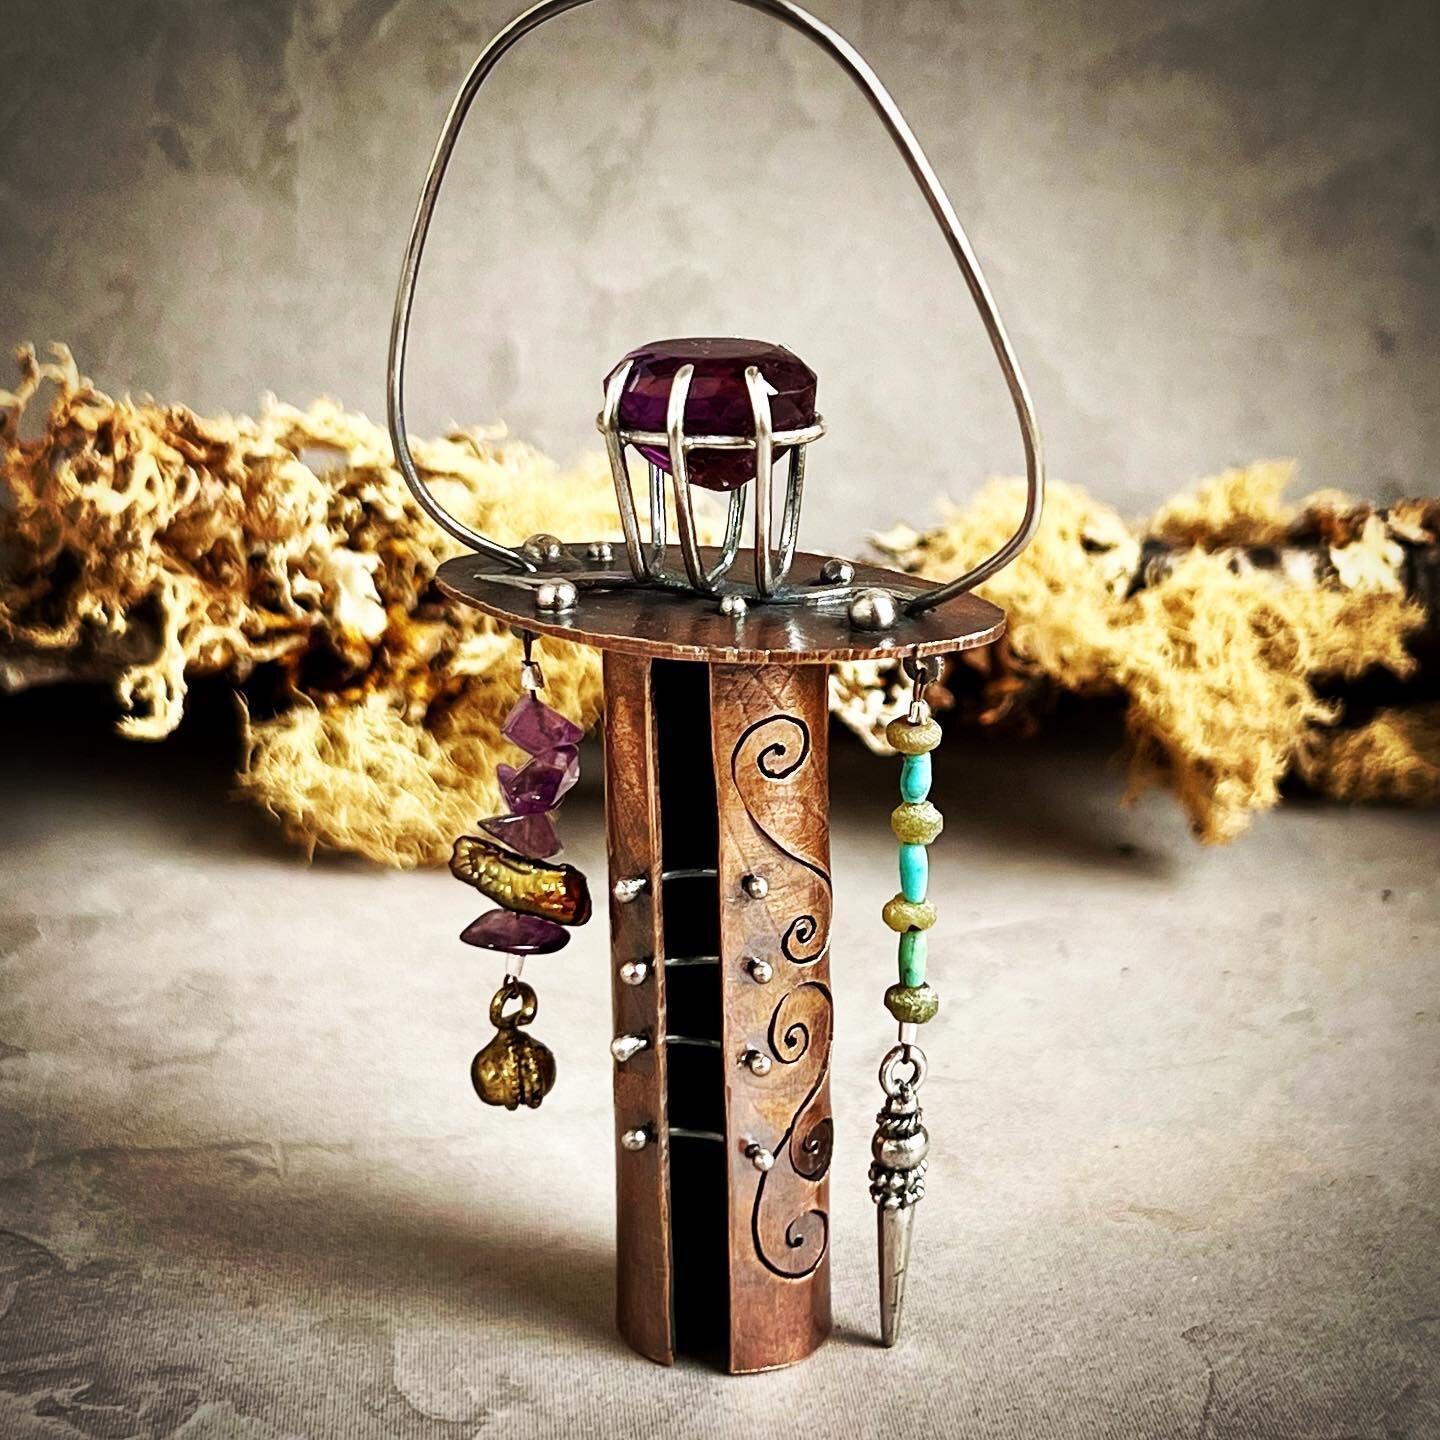 All of life vibrates. Biological, geologic, elemental life vibrates with the energy, the juice of life.  It&rsquo;s how we communicate with each other on the deepest levels.  To me, bells are a symbol of the vibrant juice of life.

#vibrantlife 
#bel